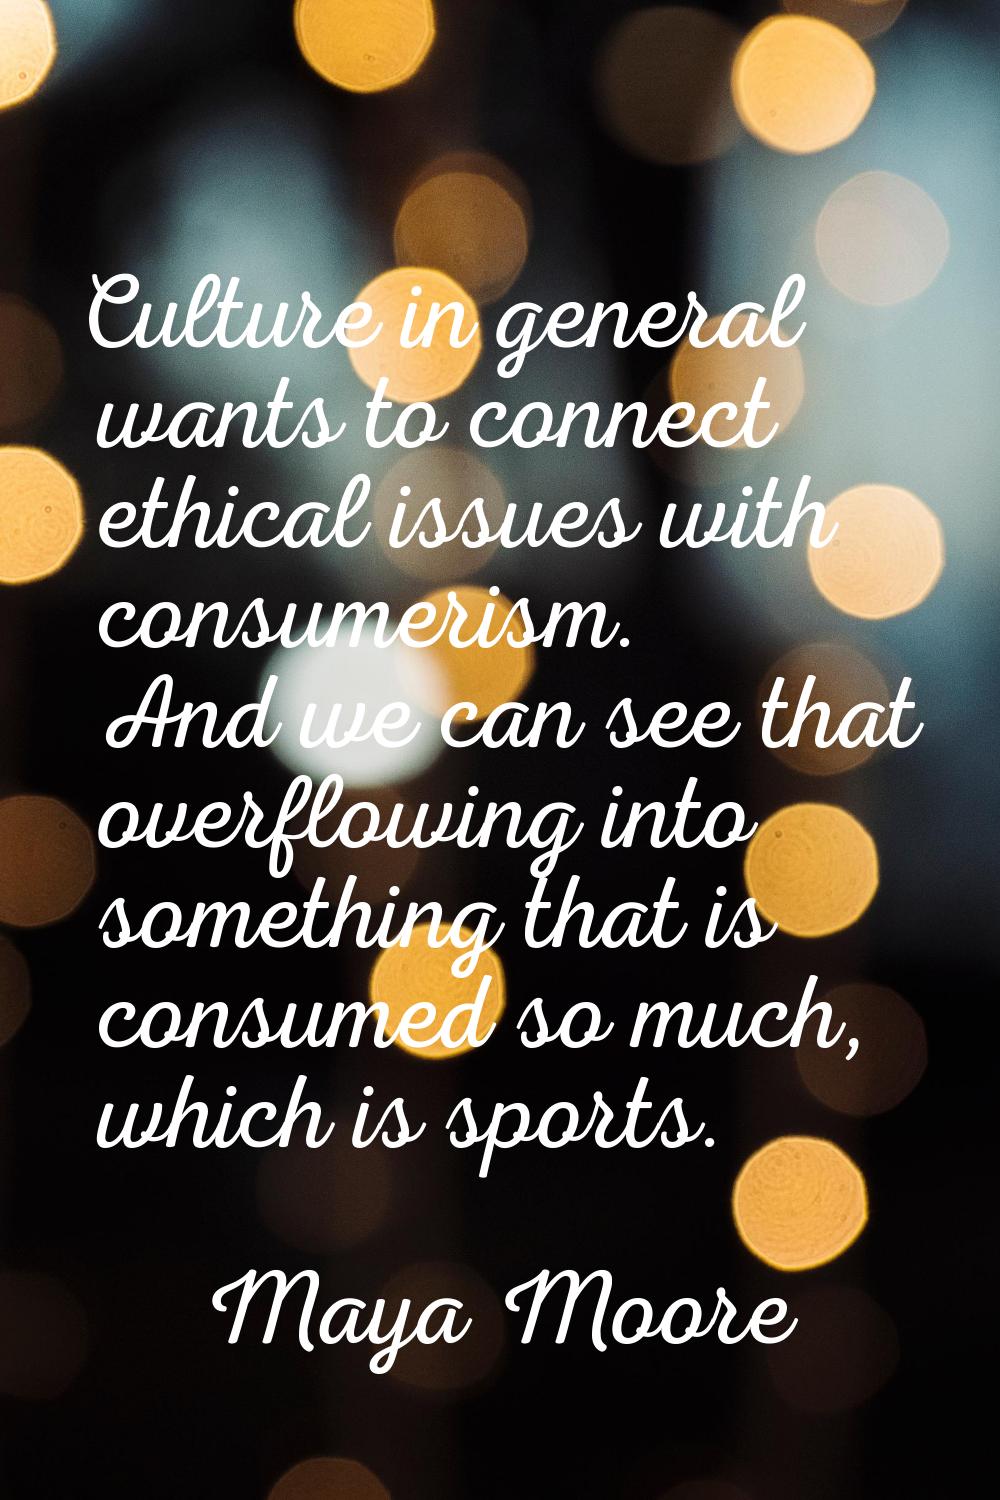 Culture in general wants to connect ethical issues with consumerism. And we can see that overflowin